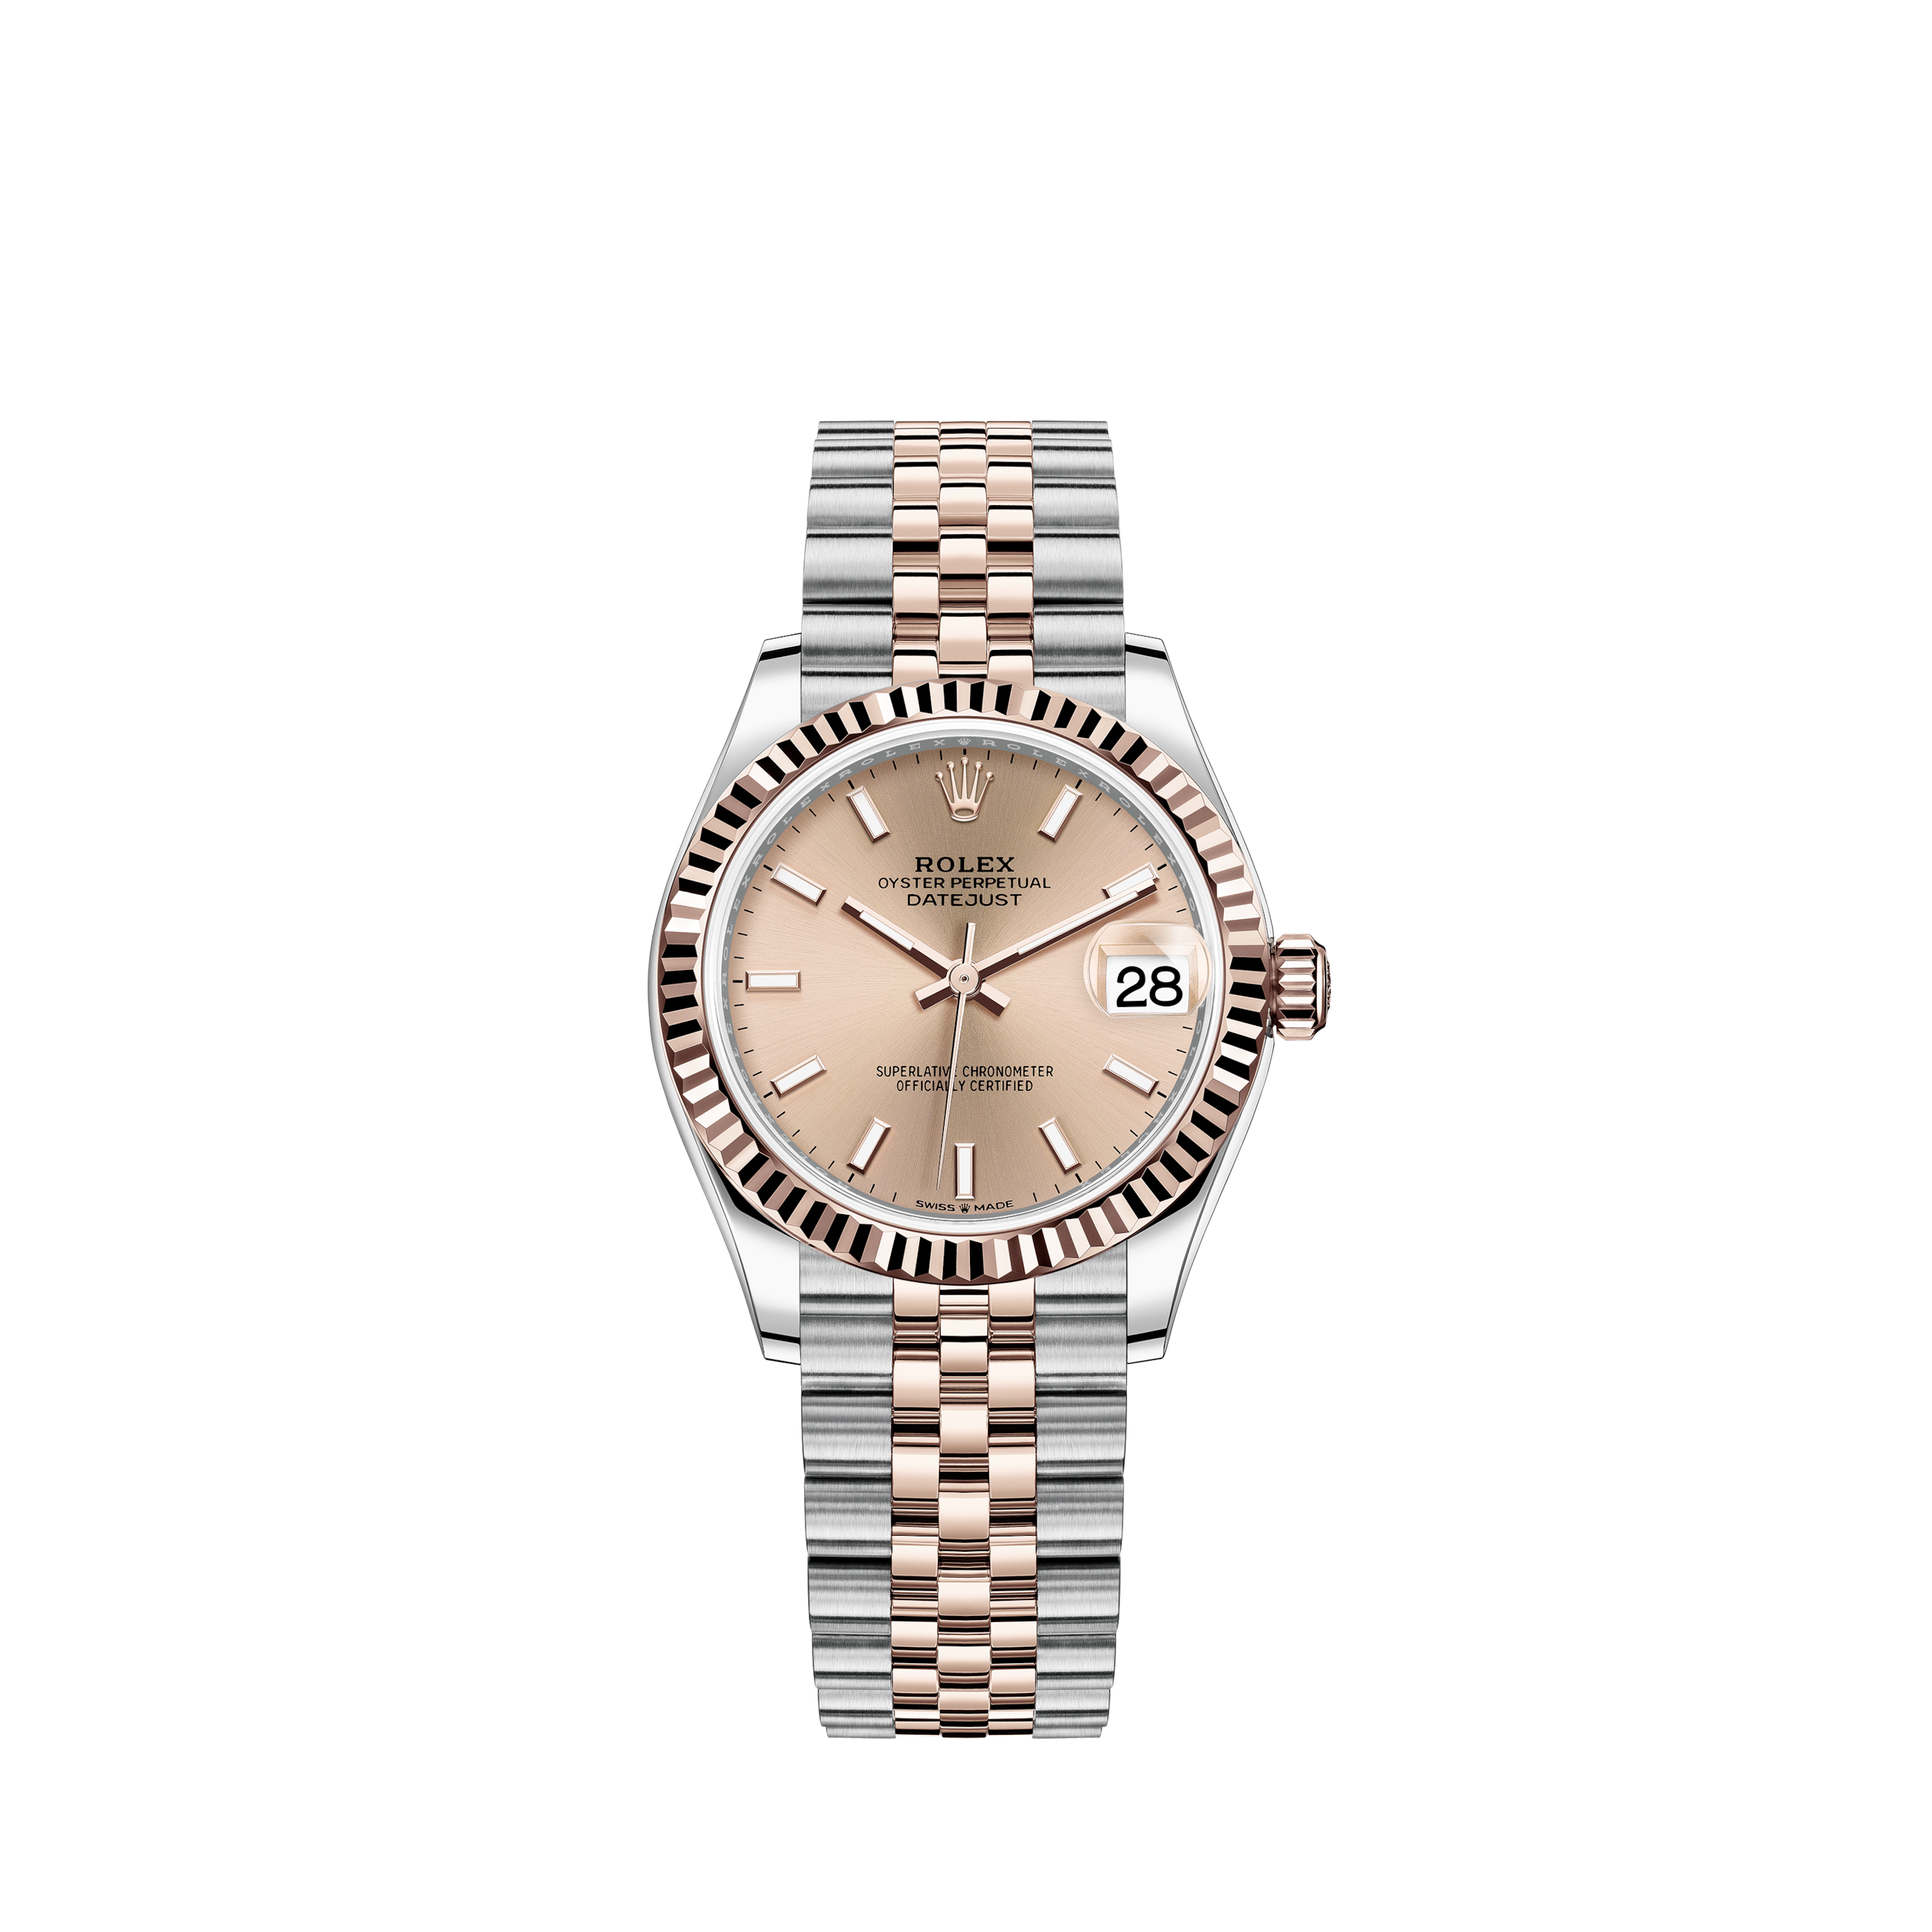 Rolex Men's Rolex President Day-Date Watch 118205 Rose Colored Dial